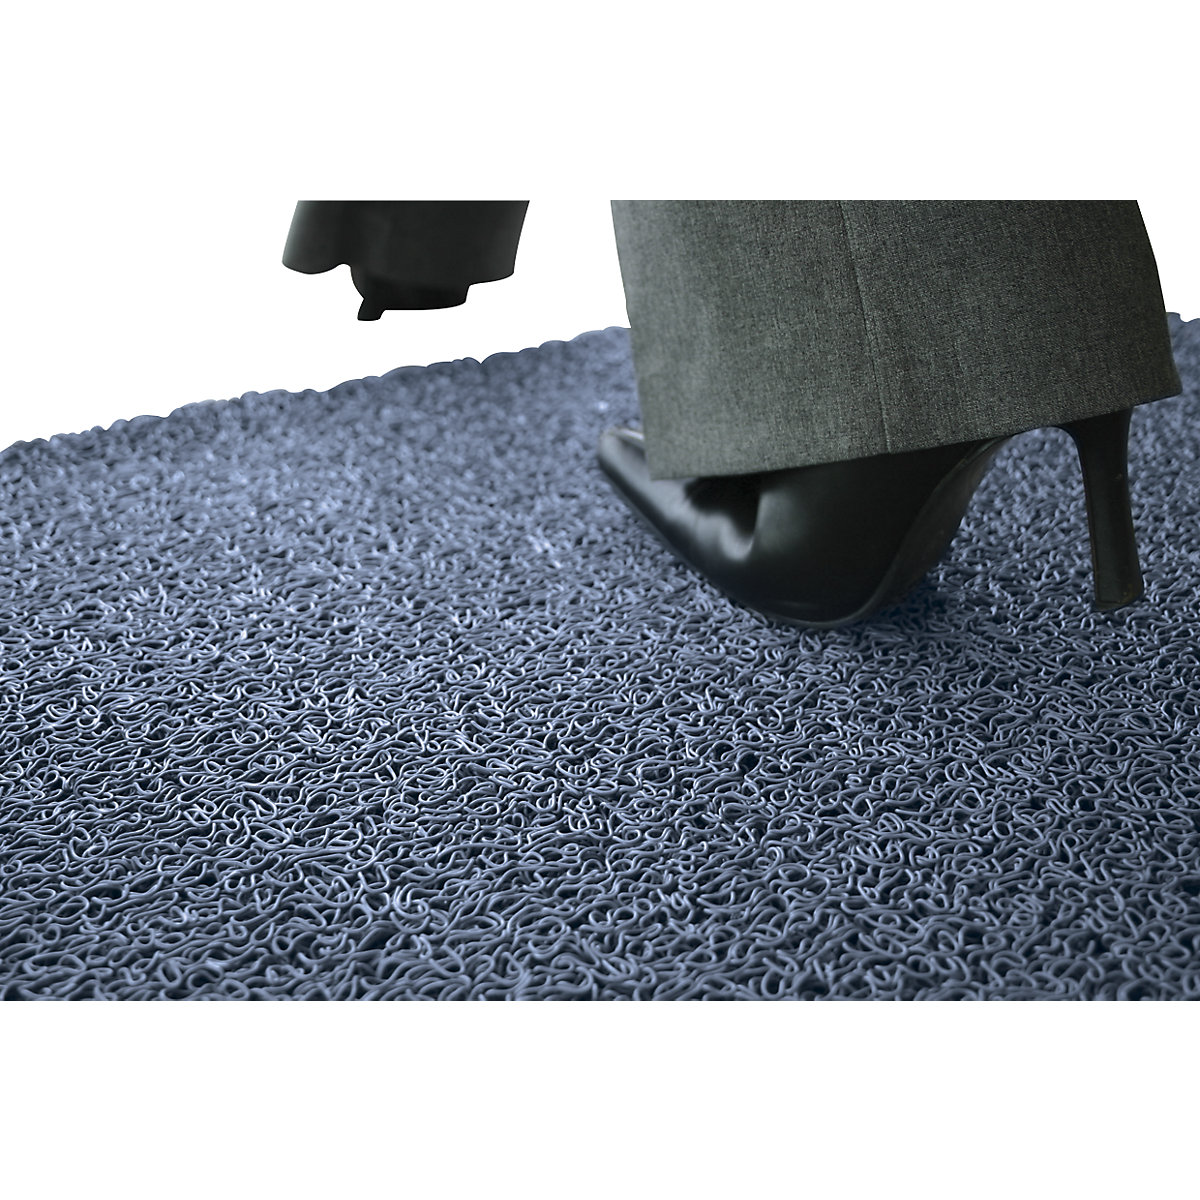 Entrance matting, flame resistant, width 900 mm, sold by the metre, blue